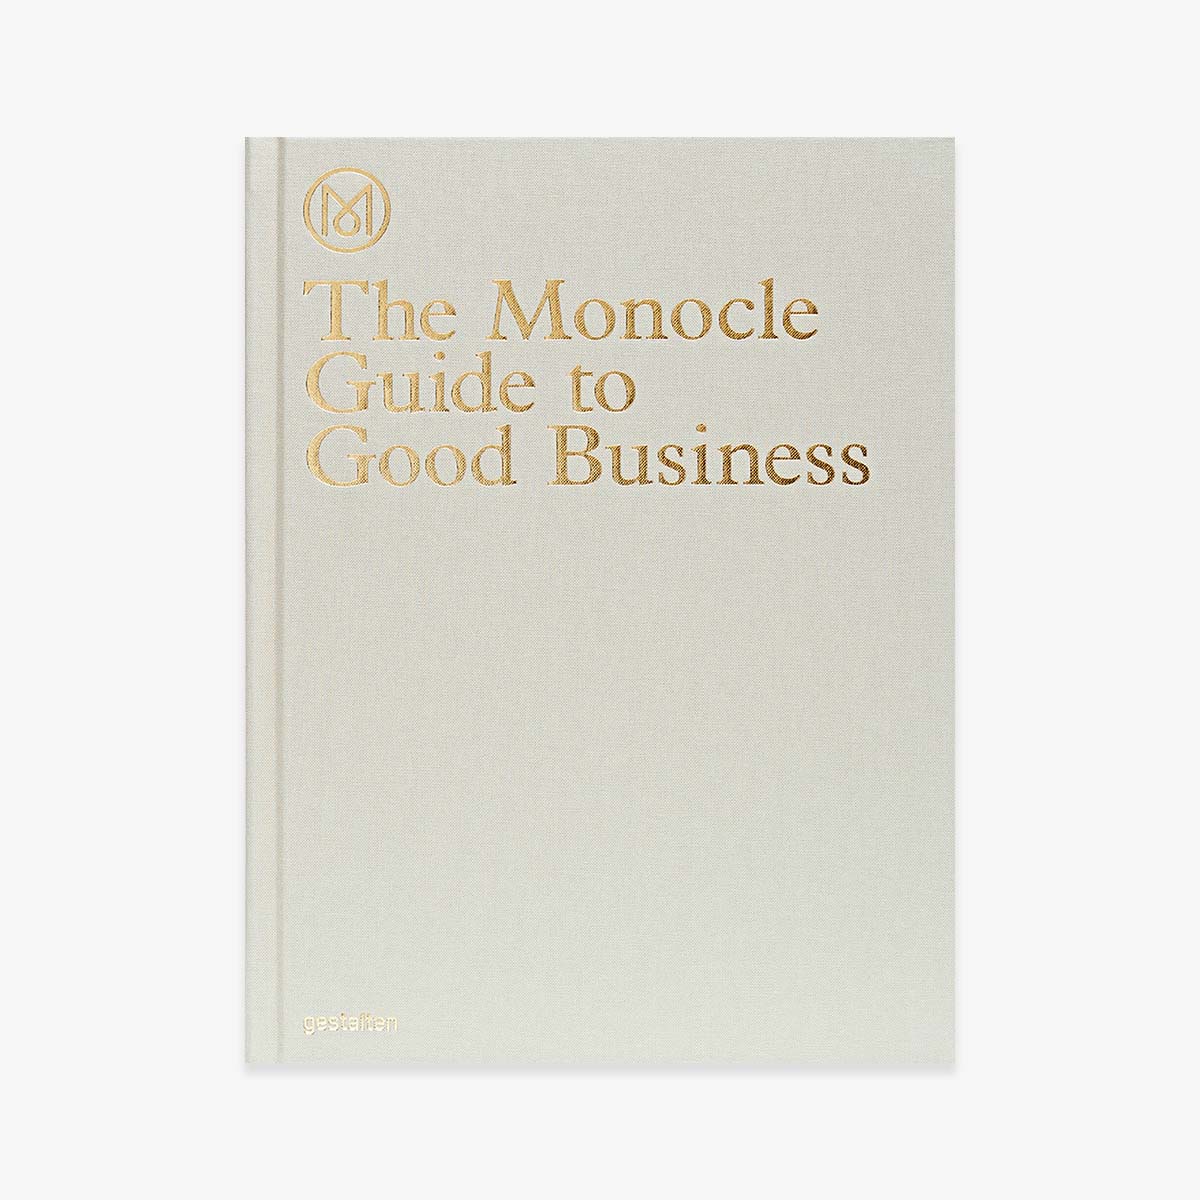 BOOK 'THE MONOCLE GUIDE TO GOOD BUSINESS'